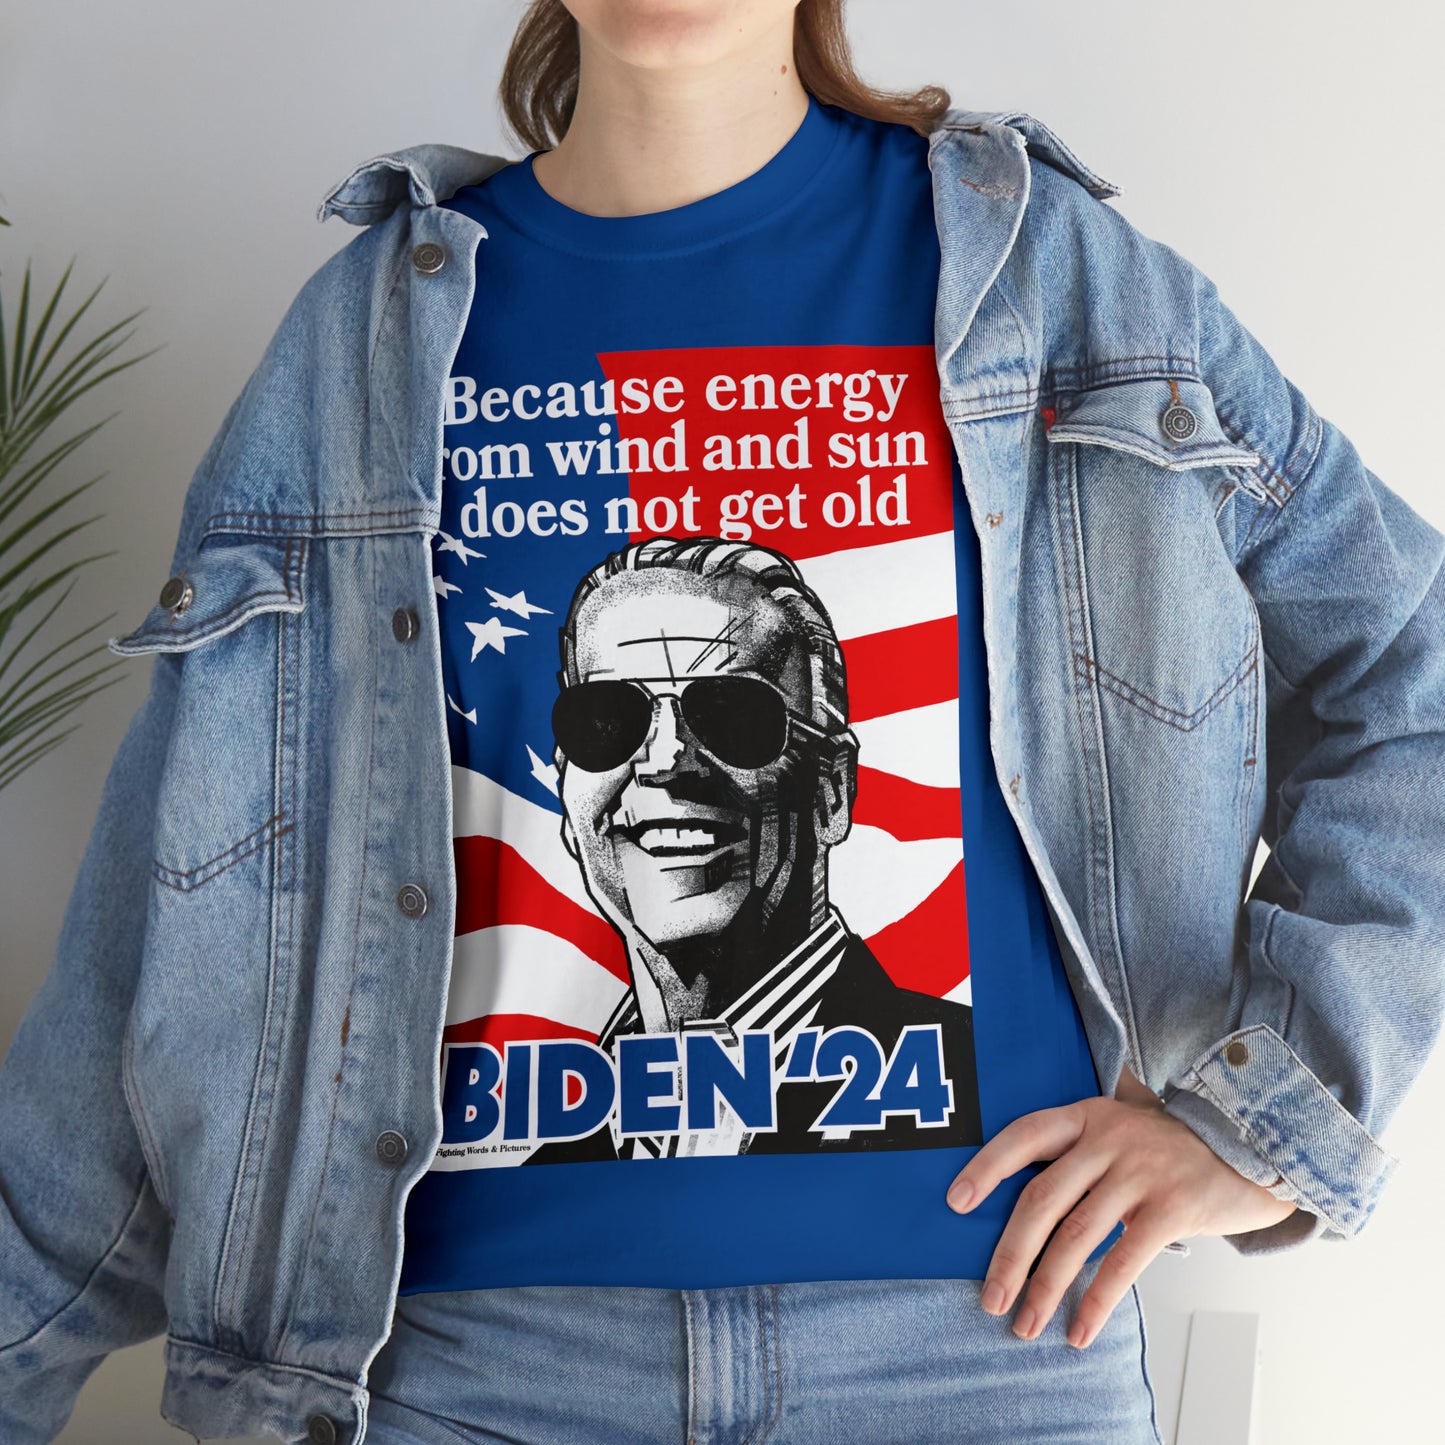 Because energy from wind and sun does not get old BIDEN'24 Unisex Heavy Cotton Tee